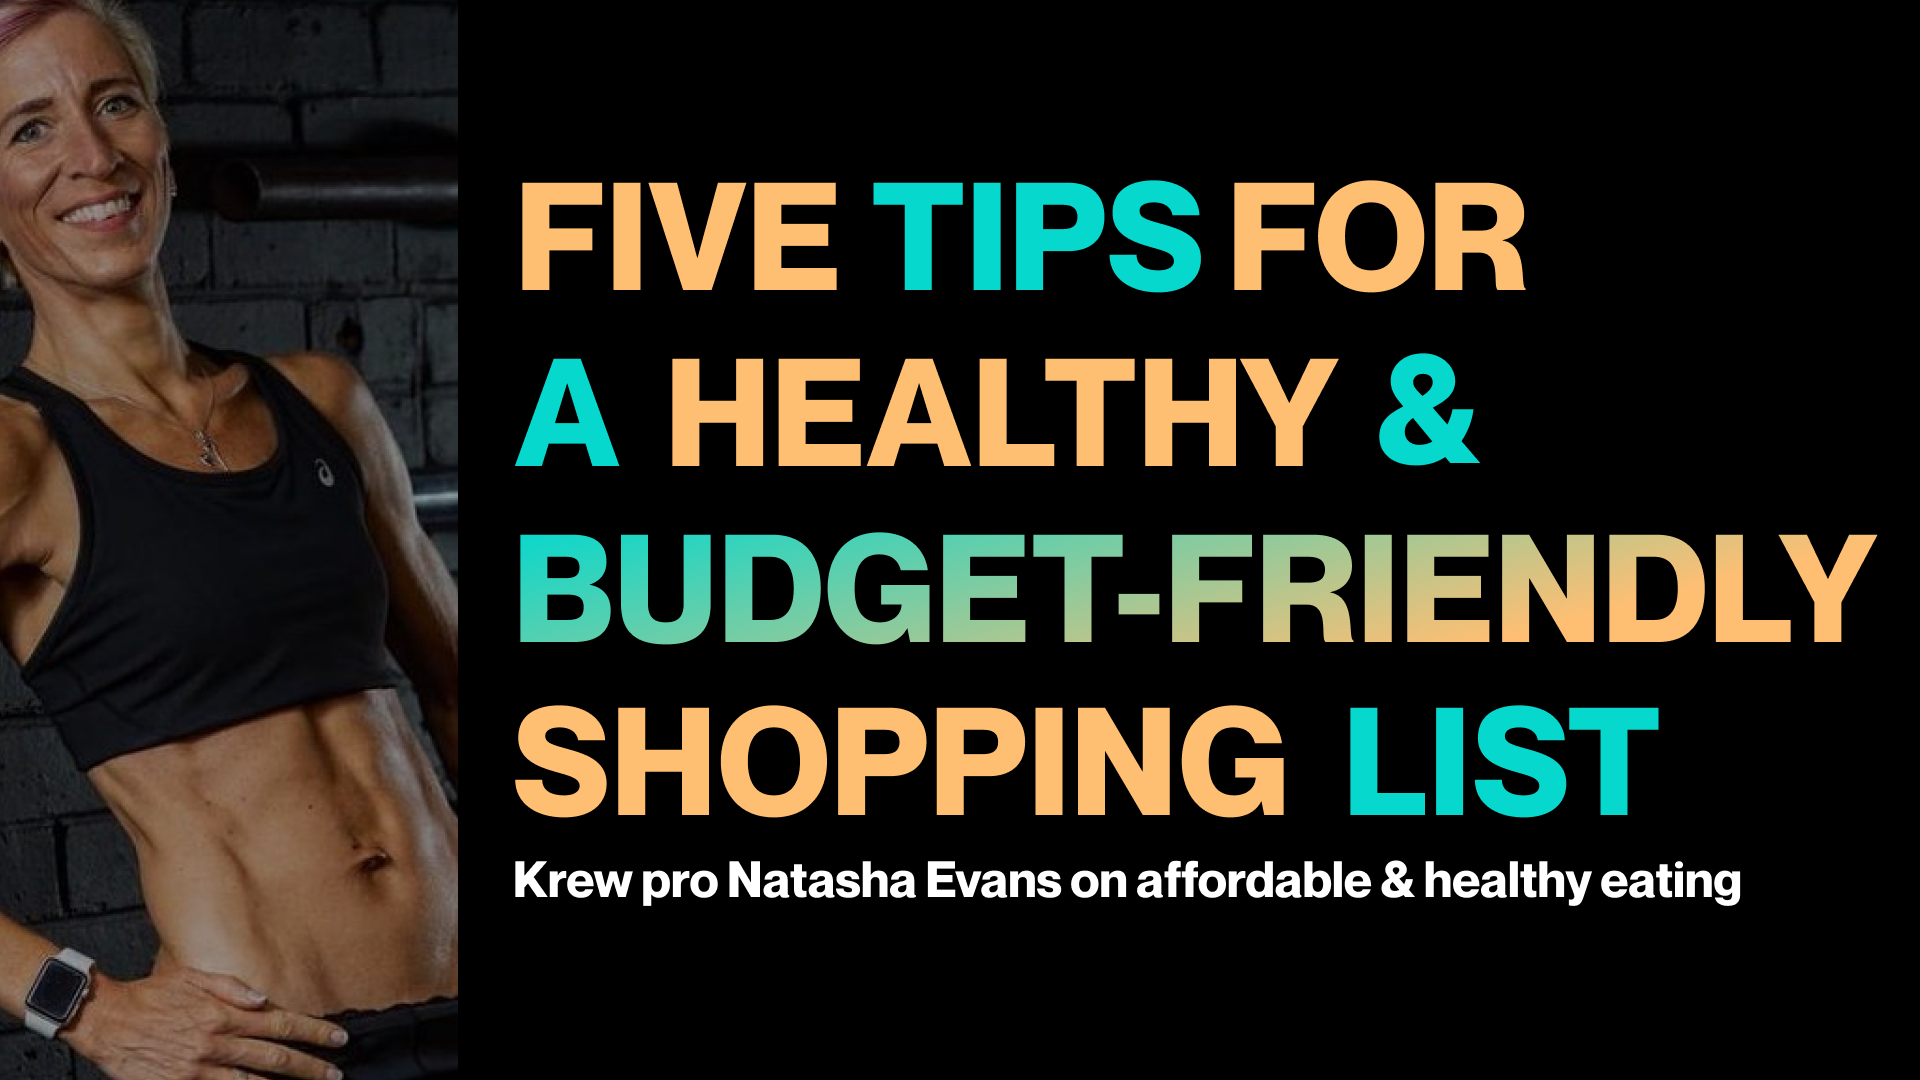 5 Tips for a healthy and budget-friendly shopping list